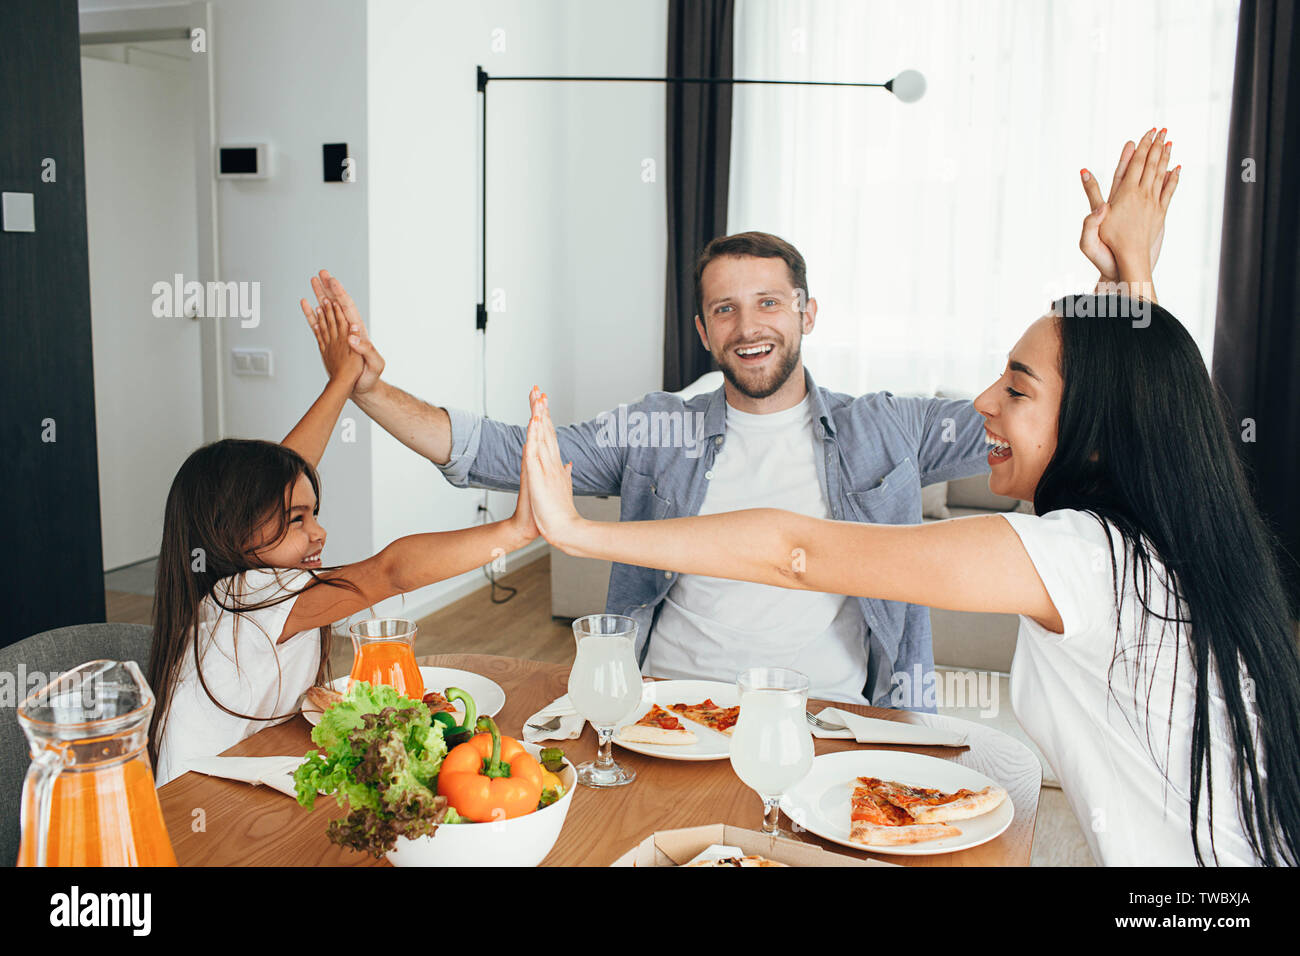 happy multi ethnic family, mother, father and daughter during dinner.Eating delicious pizza with family Stock Photo